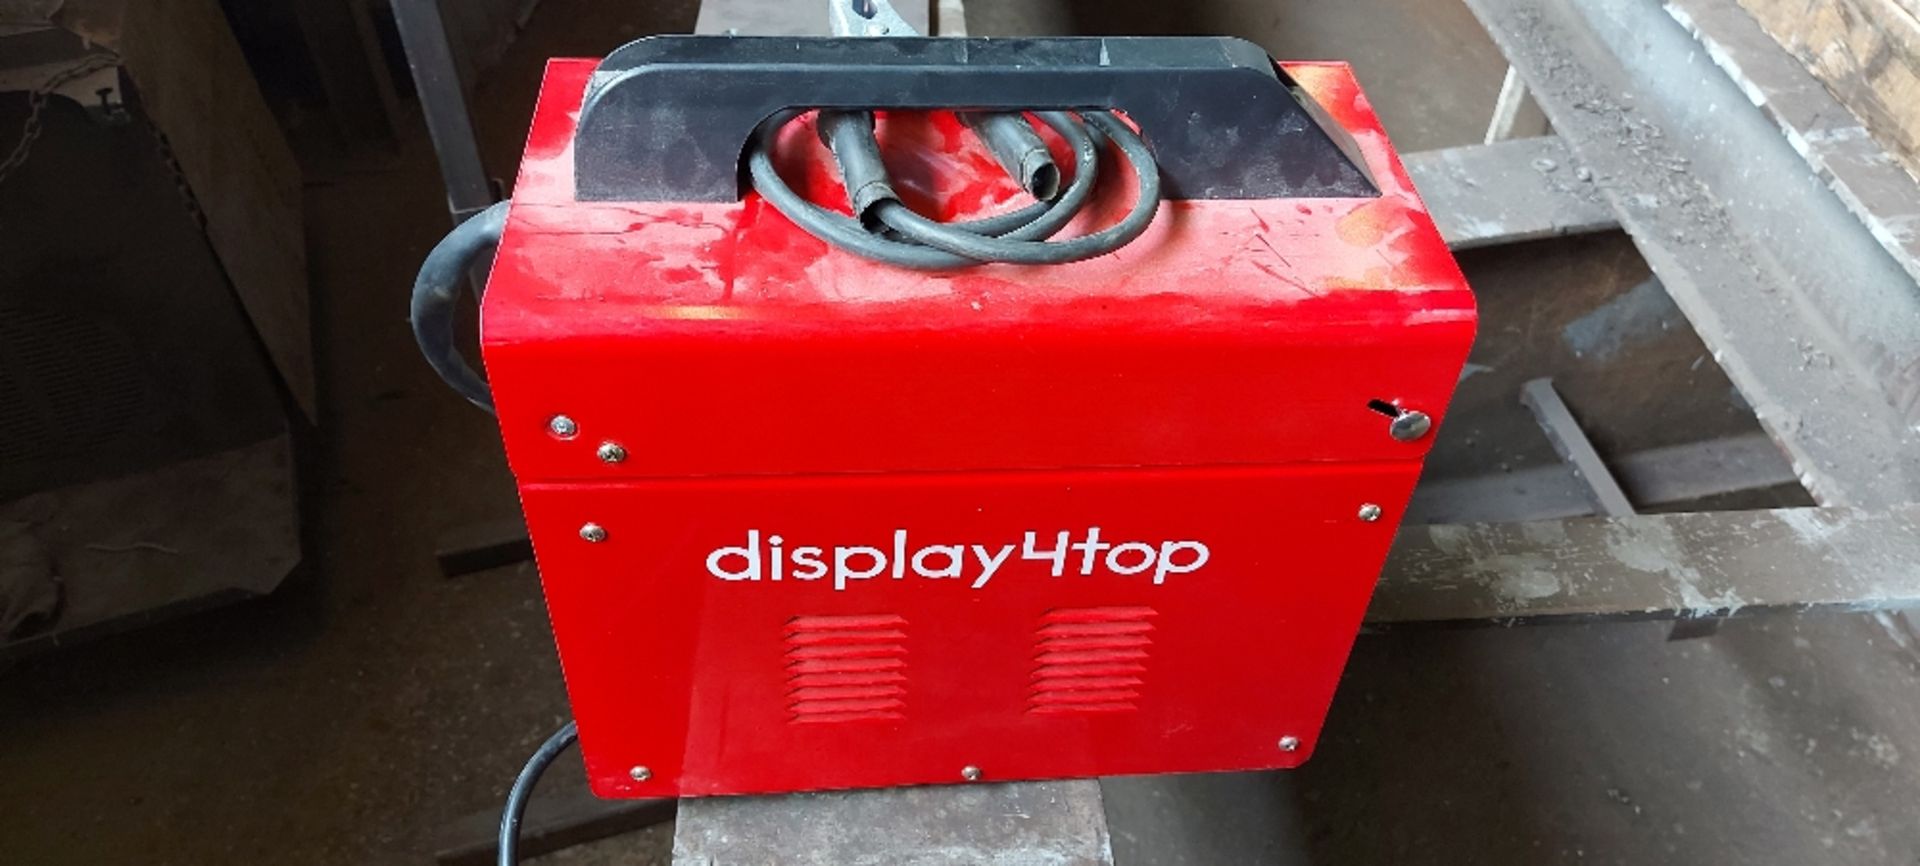 Diplay4Top Mig 130 Welder (For Parts and Spares) - Image 4 of 5